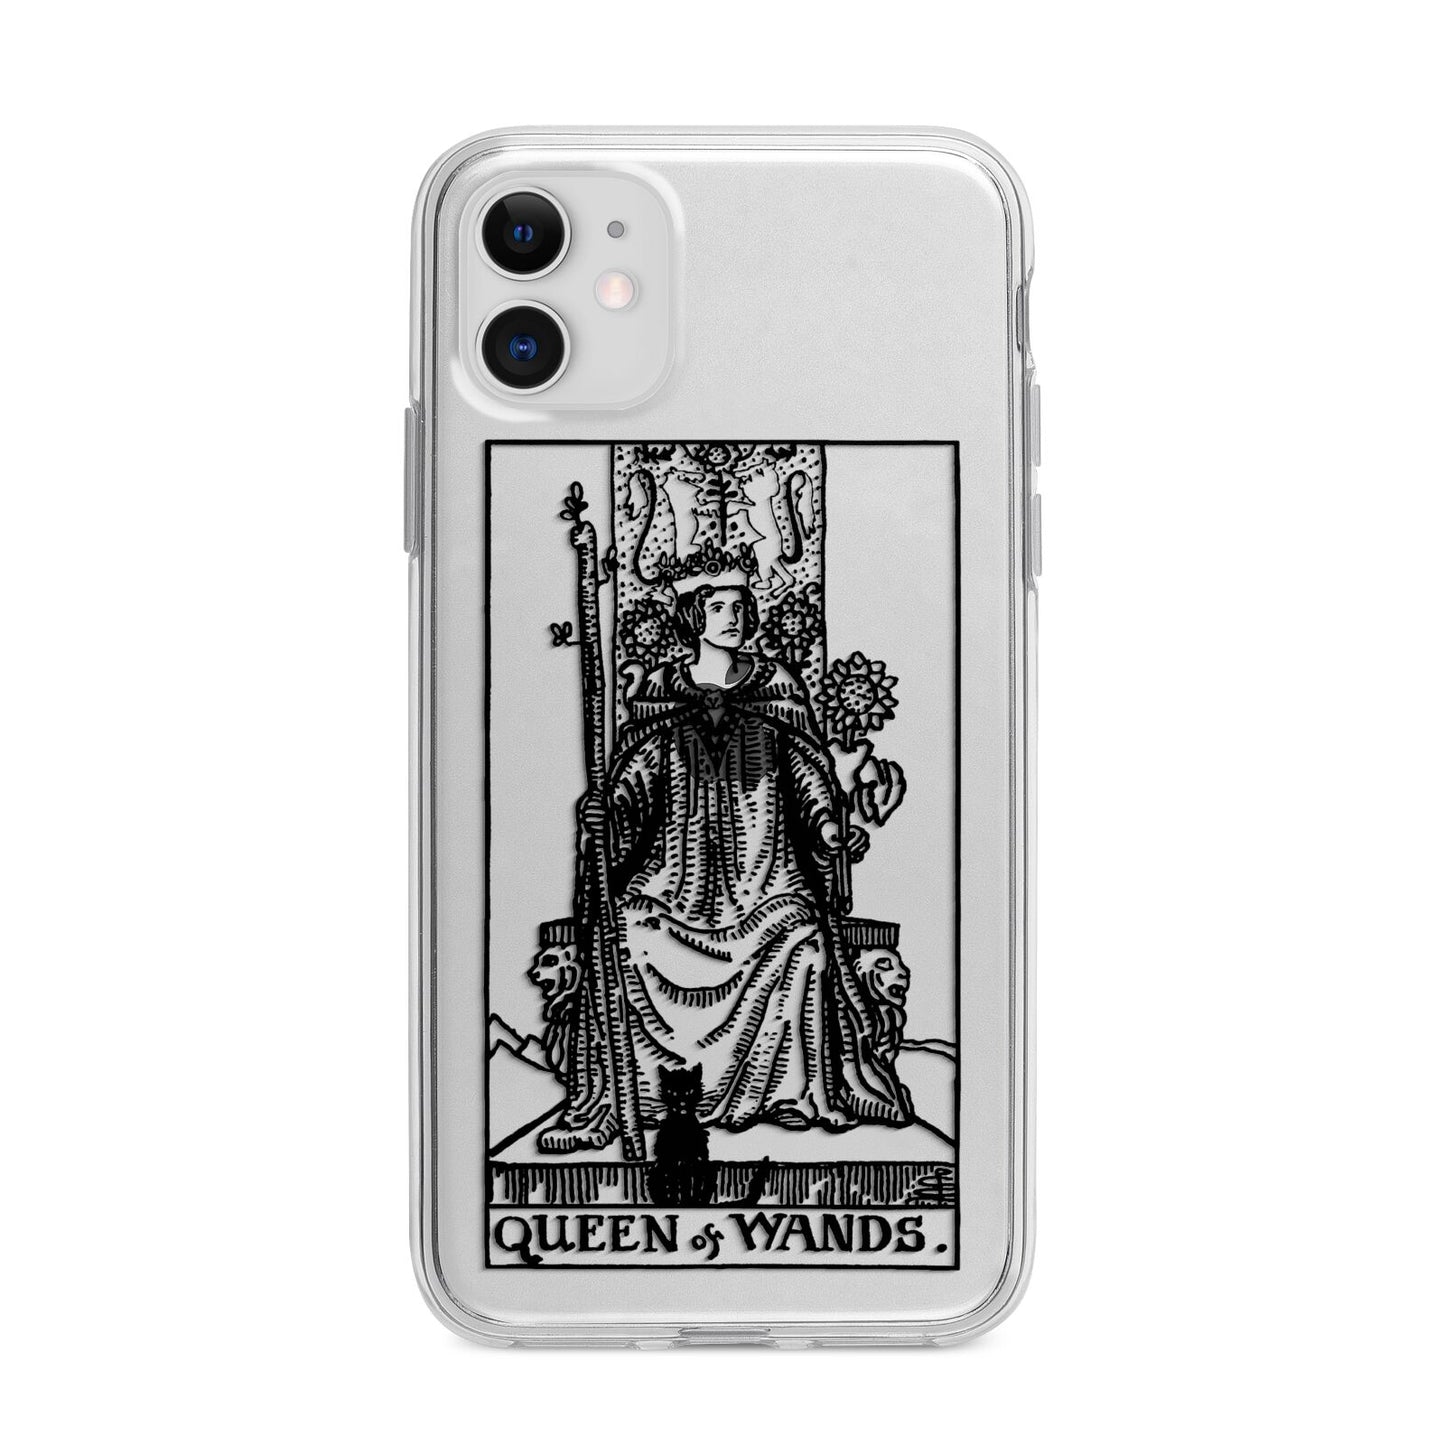 Queen of Wands Monochrome Apple iPhone 11 in White with Bumper Case